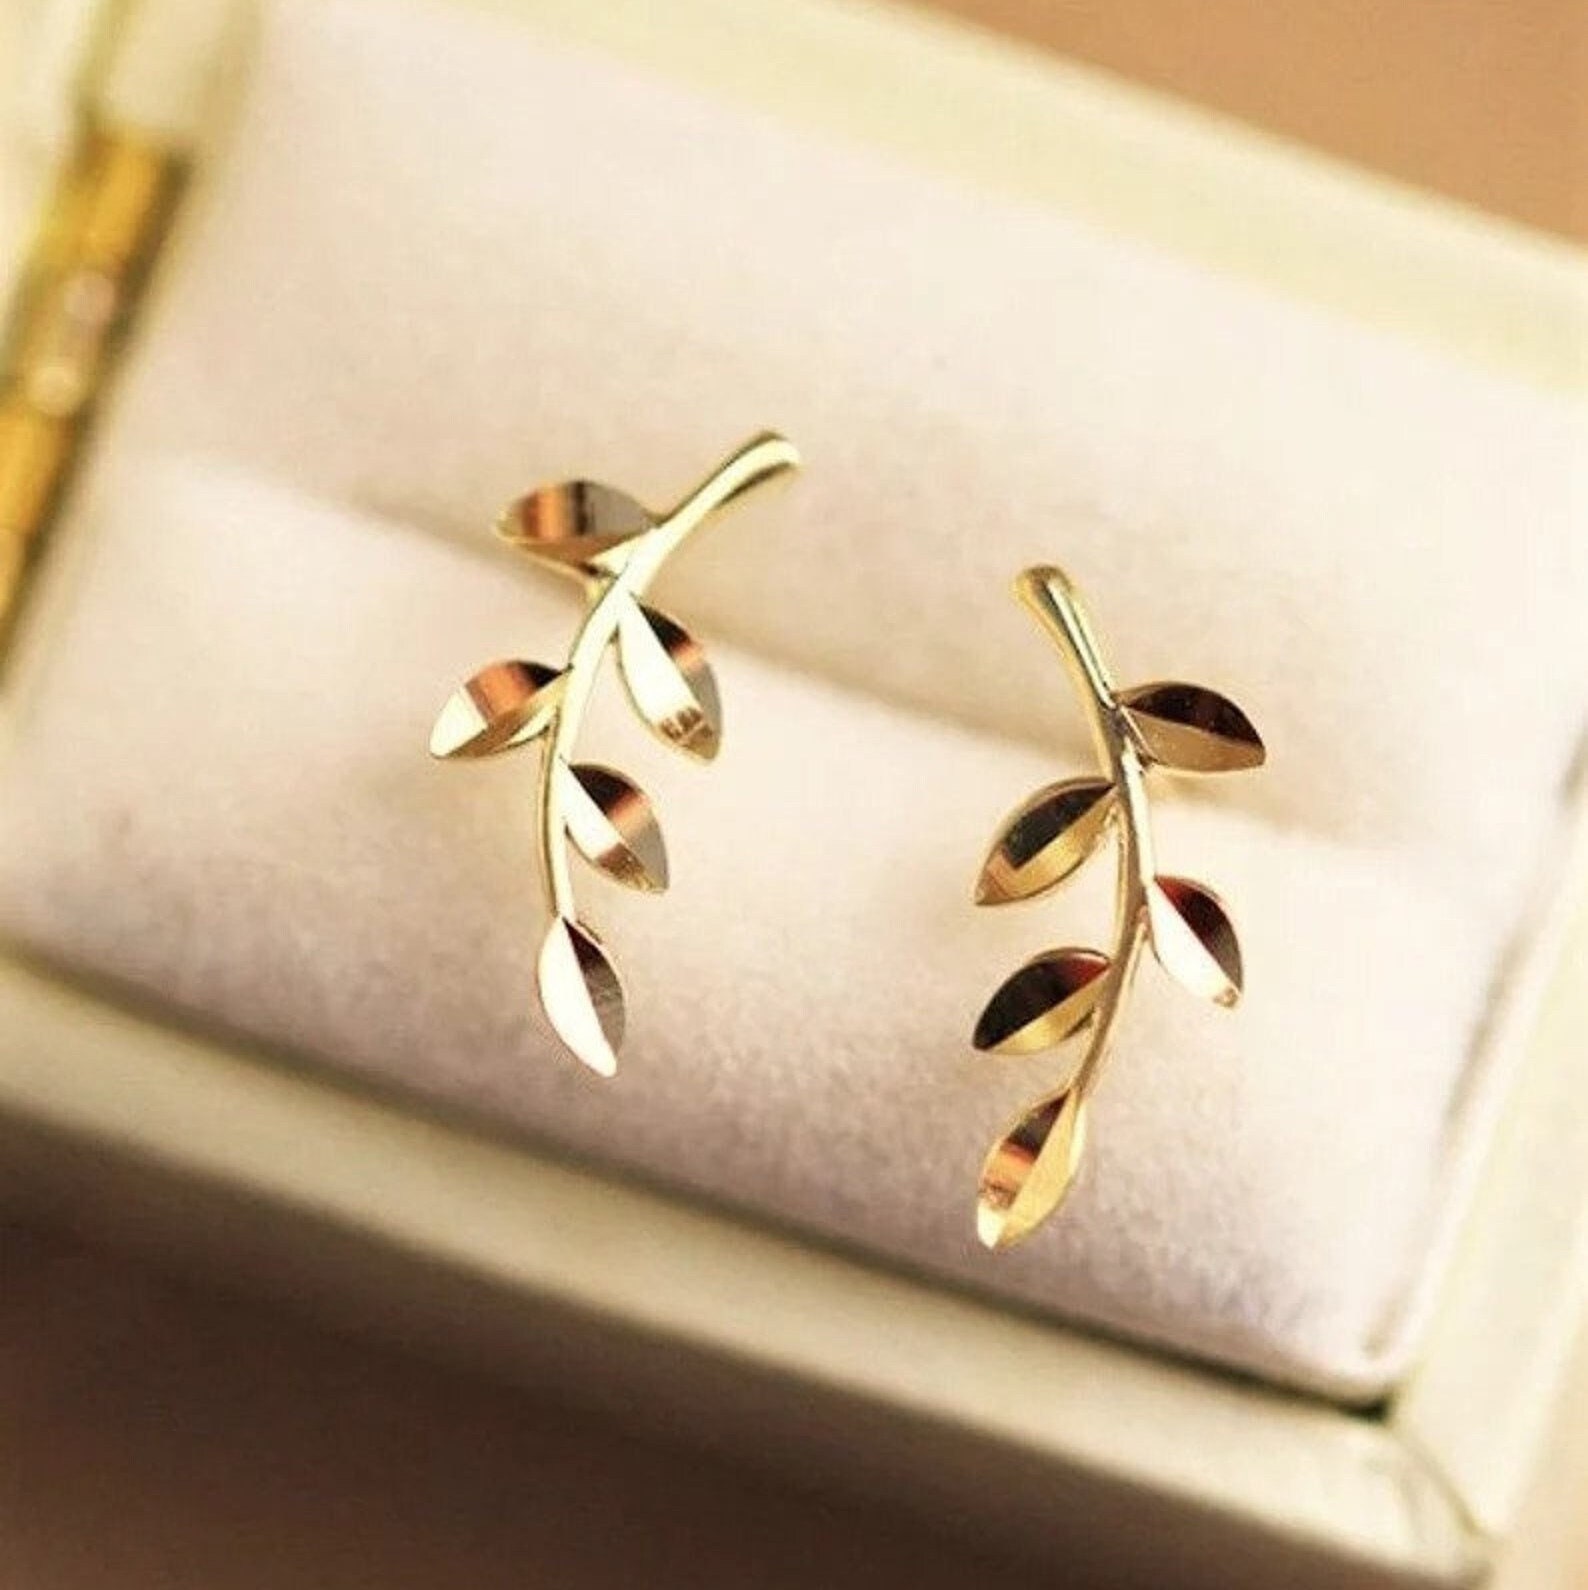 14K Solid Gold Delicate Olive Branch Stud Earrings, Dainty Leaves Stud Earrings, Gift for Her, Christmas gift for her, Mother´s Day Giftthumbnail